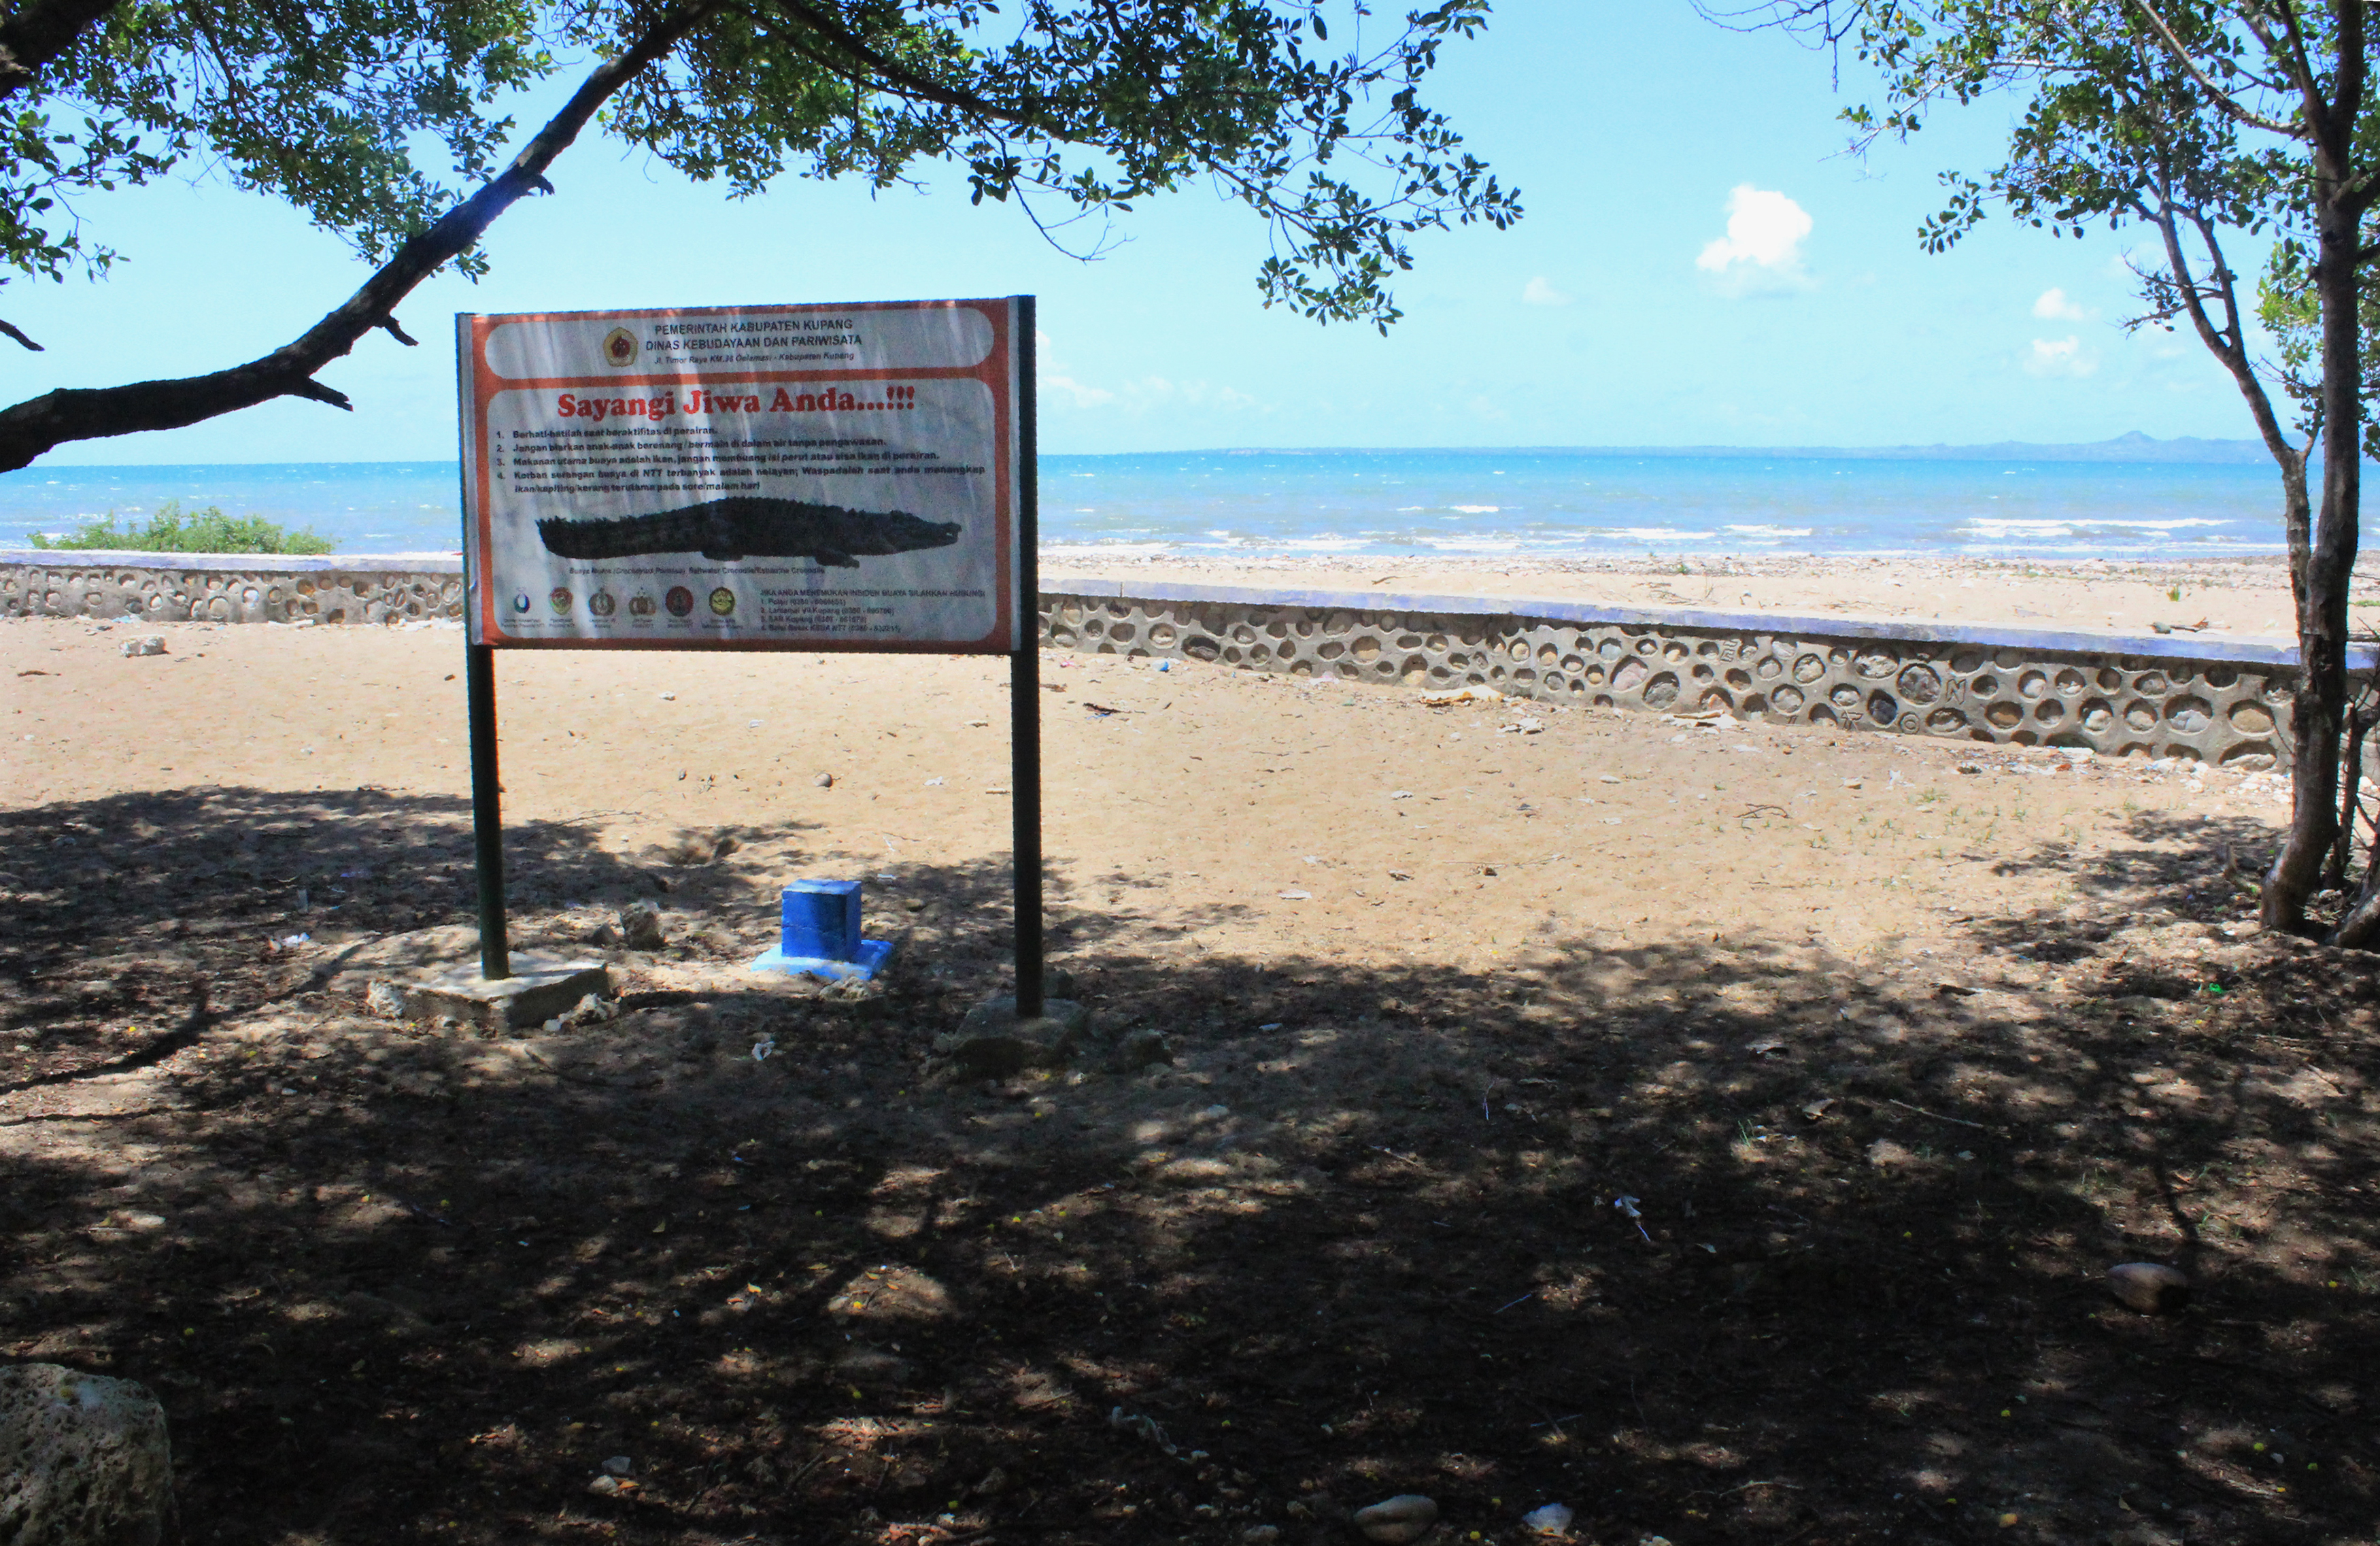 This picture taken on July 27, 2016 shows a sign which reads "Mind Your Life", alerting people to the crocodile threat on a beach in Kupang, in East Nusa Tenggara province. An Indonesian city has hit on an original idea to rid its popular beaches of crocodiles -- it will offer cash prizes to people who catch the man-eating reptiles, an official said on August 5.  / AFP PHOTO / Joey CHRISTIAN